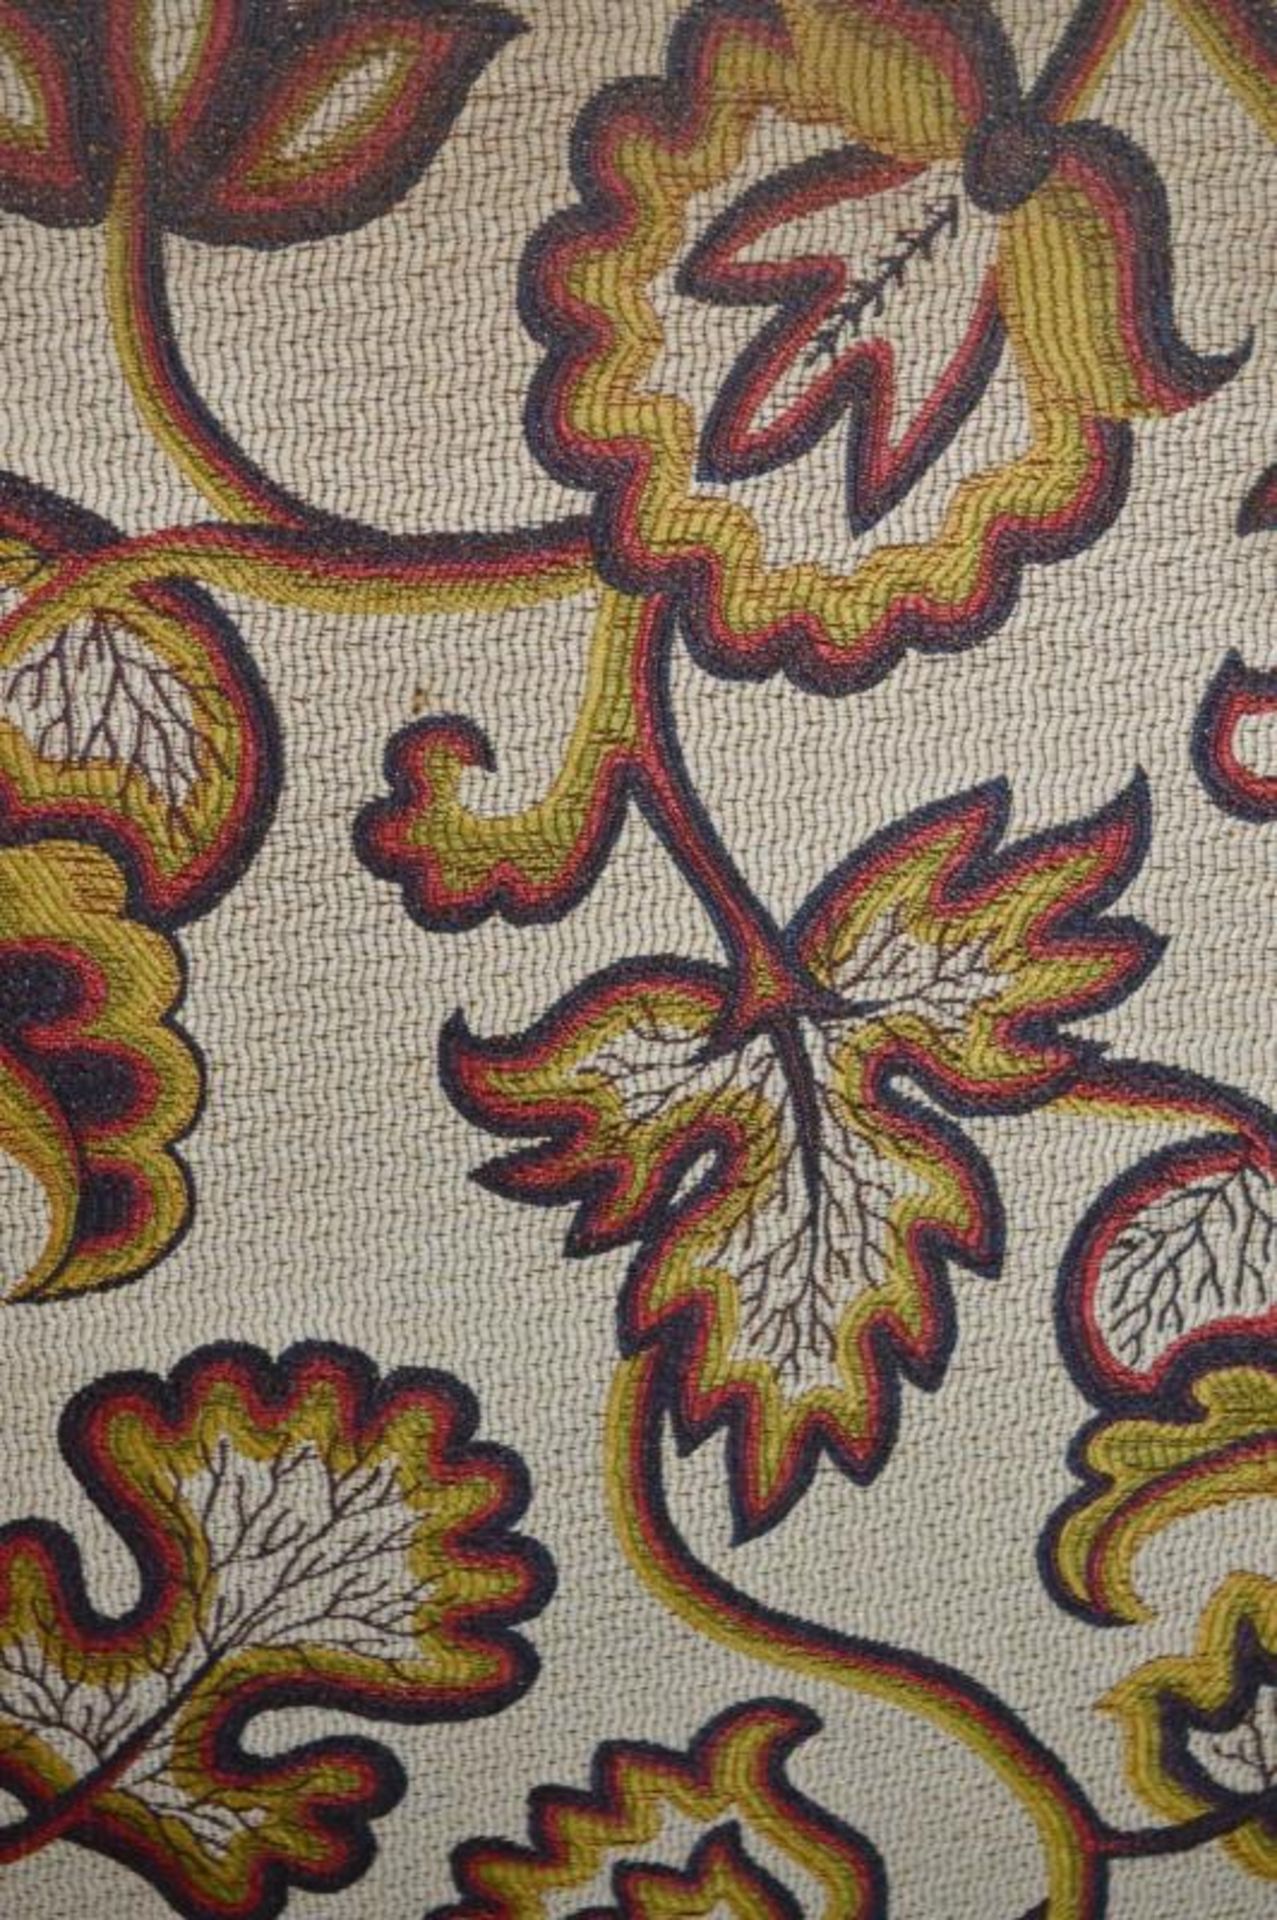 3 x Upholstered Restaurant Dining Chairs In A Floral Mexican-style Fabric - Image 3 of 3